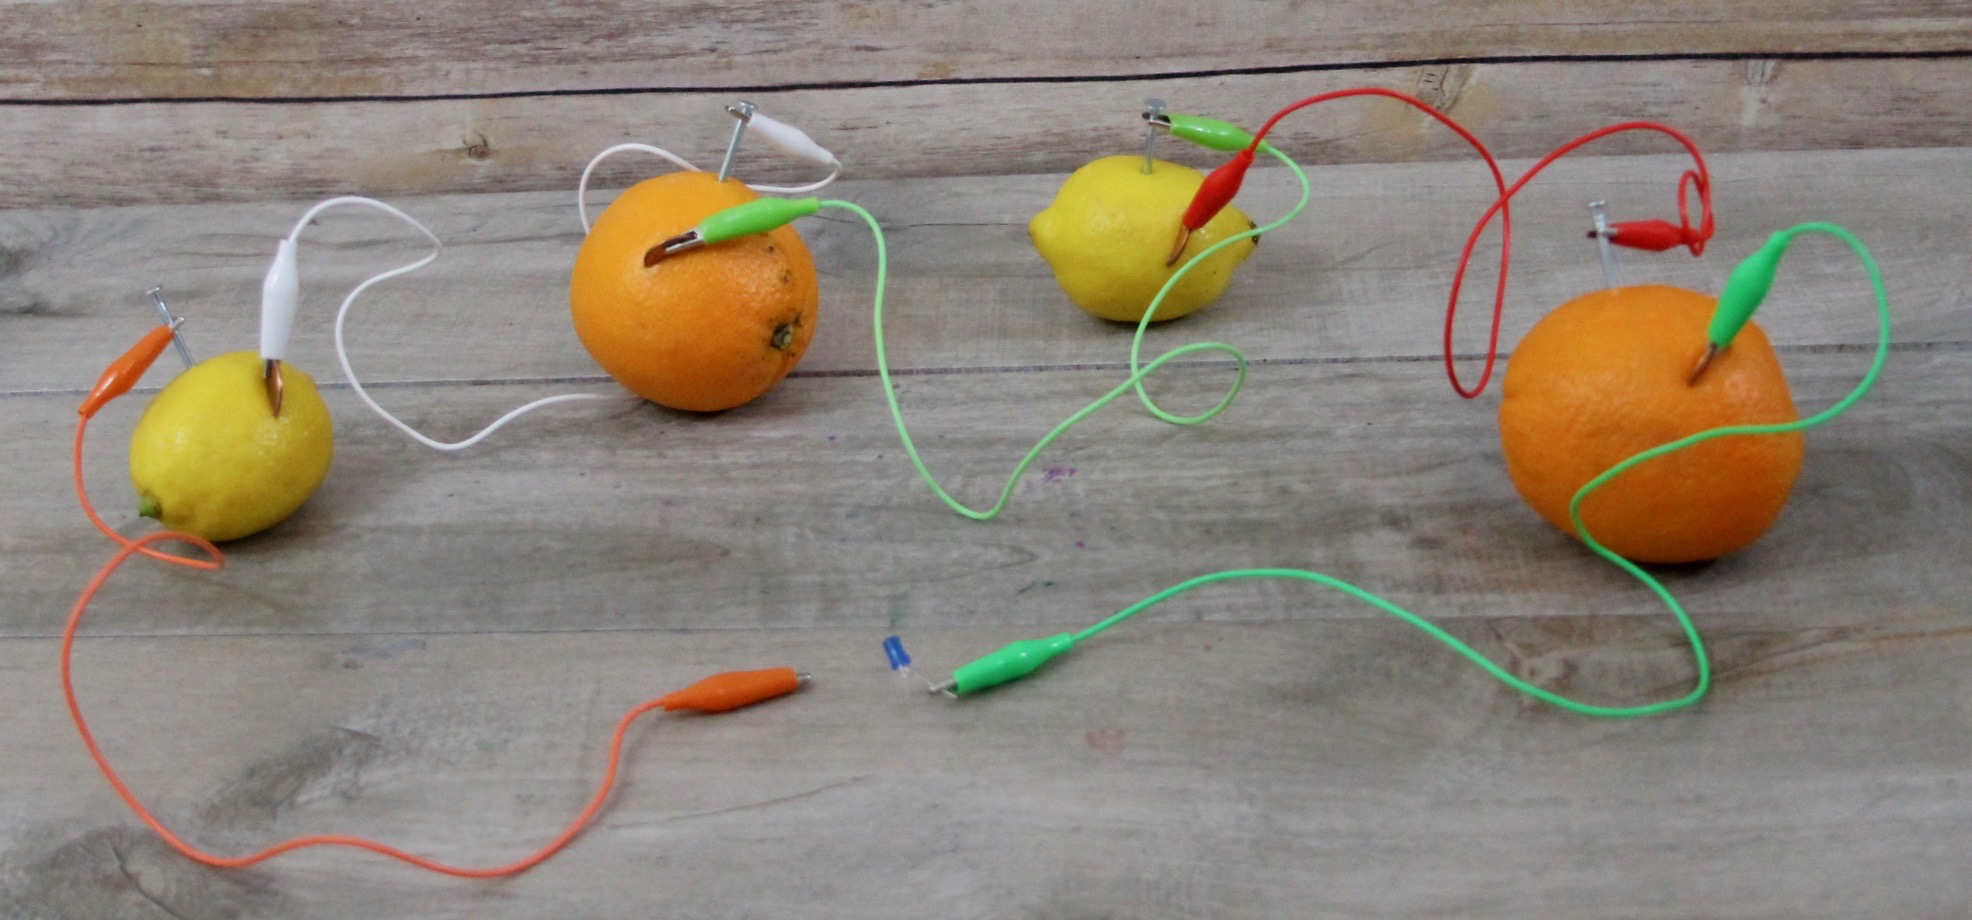 Fruit Battery and Other Fun Hands-On STEM Projects for Kids